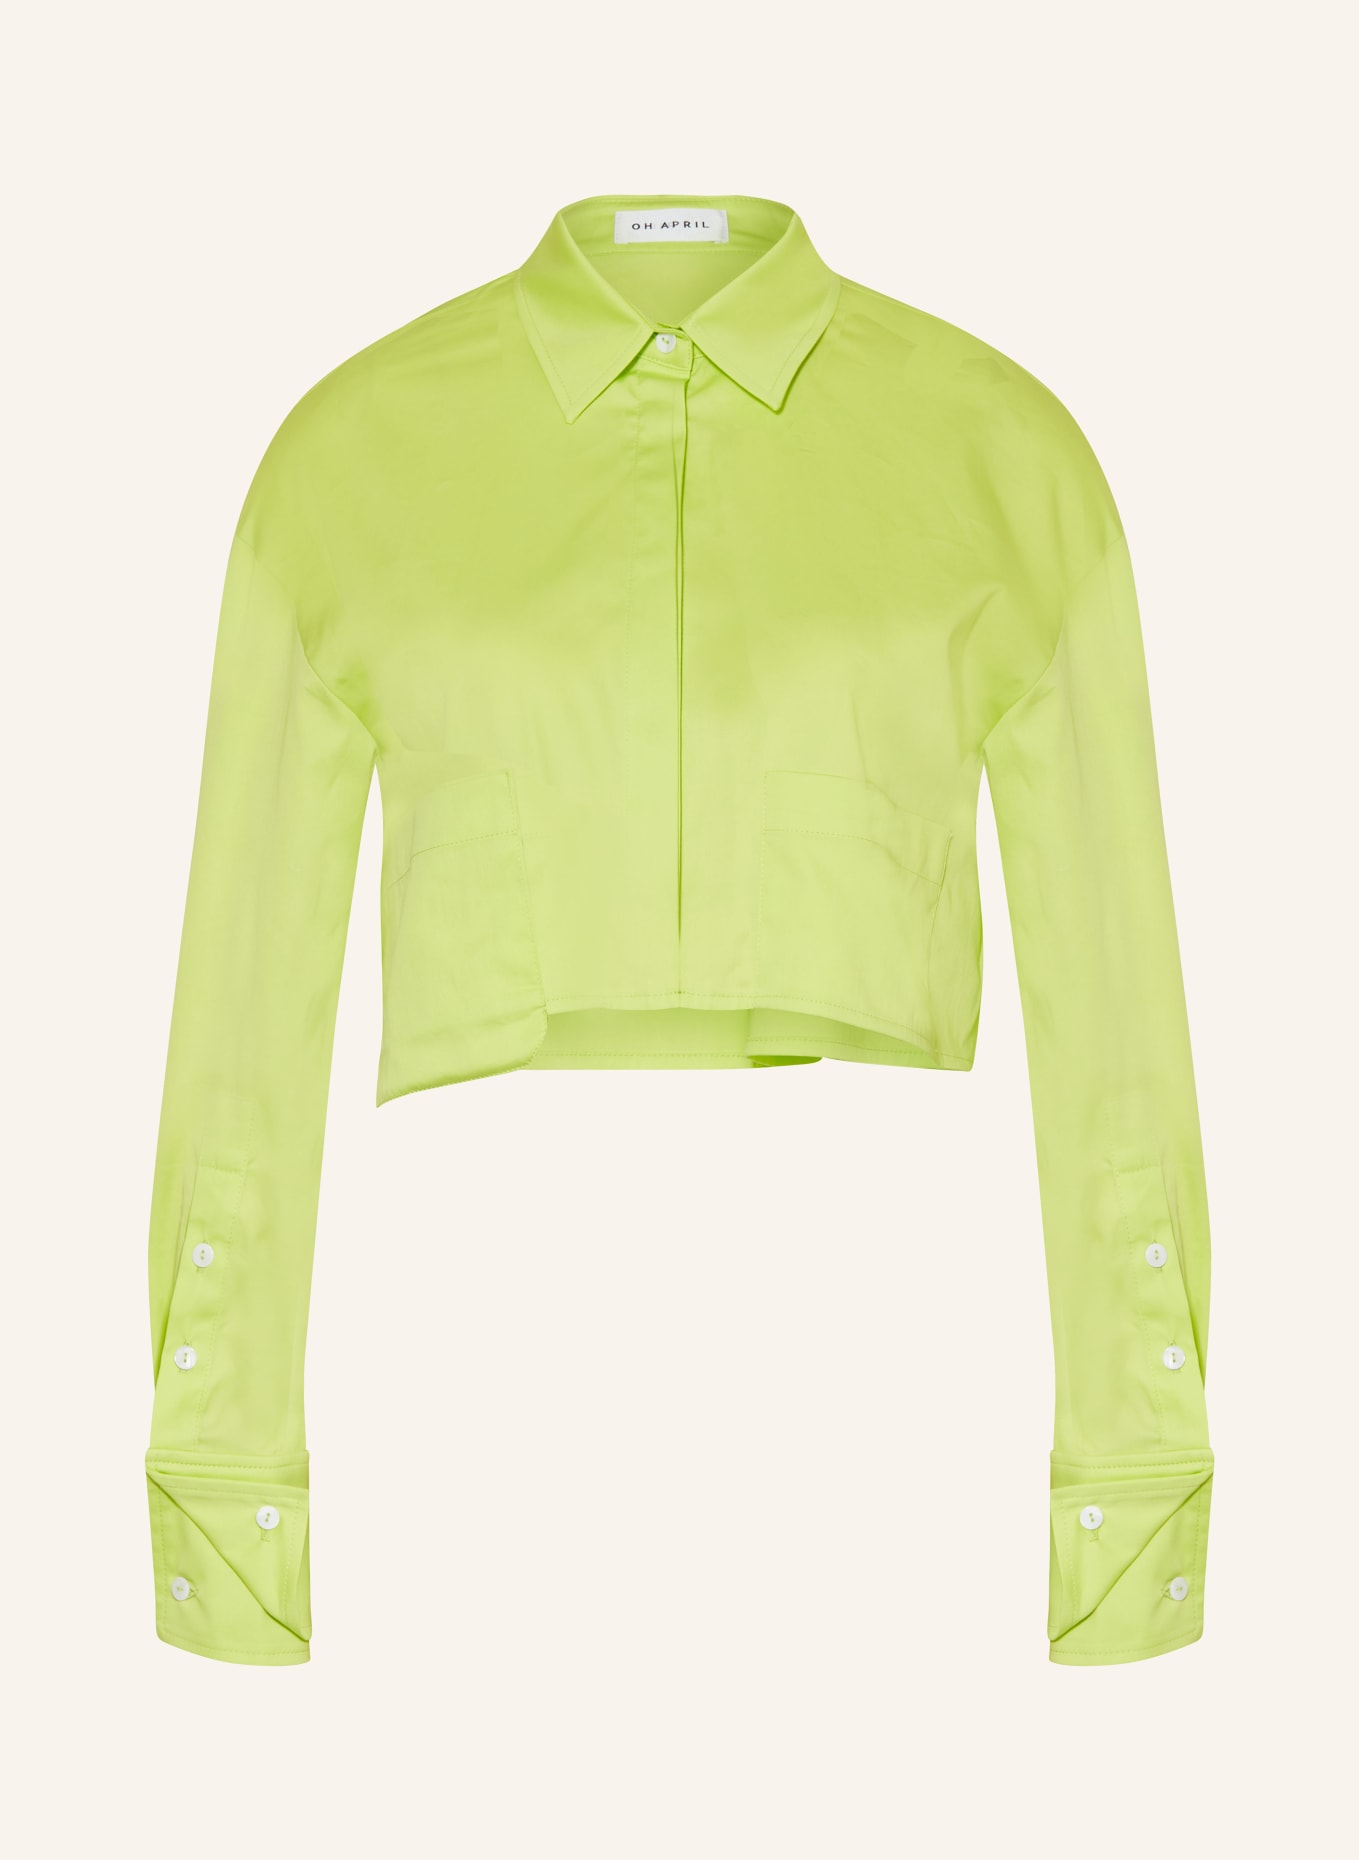 OH APRIL Cropped shirt blouse ARIA, Color: LIME LIME (Image 1)